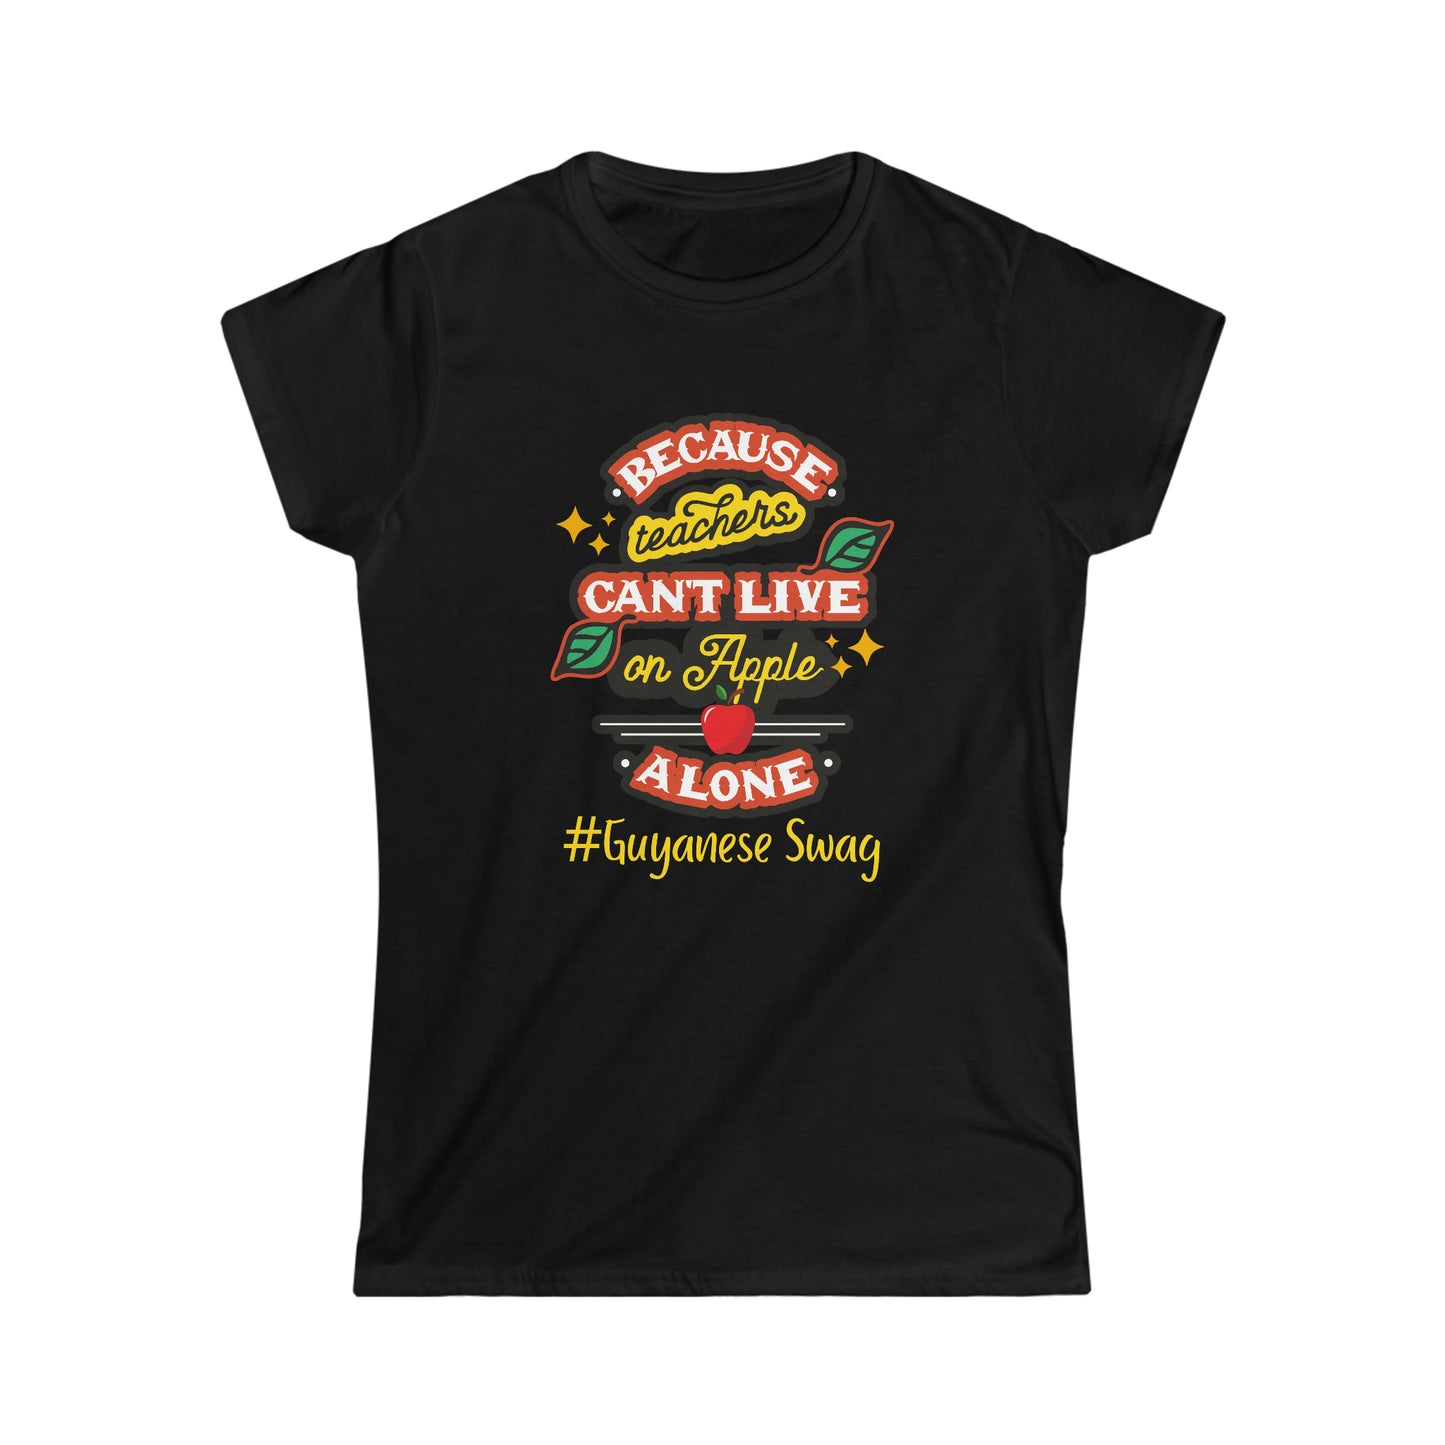 "Because Teachers Can't Live on Apples Alone" woman's black softstyle tee from Guyanese Swag.